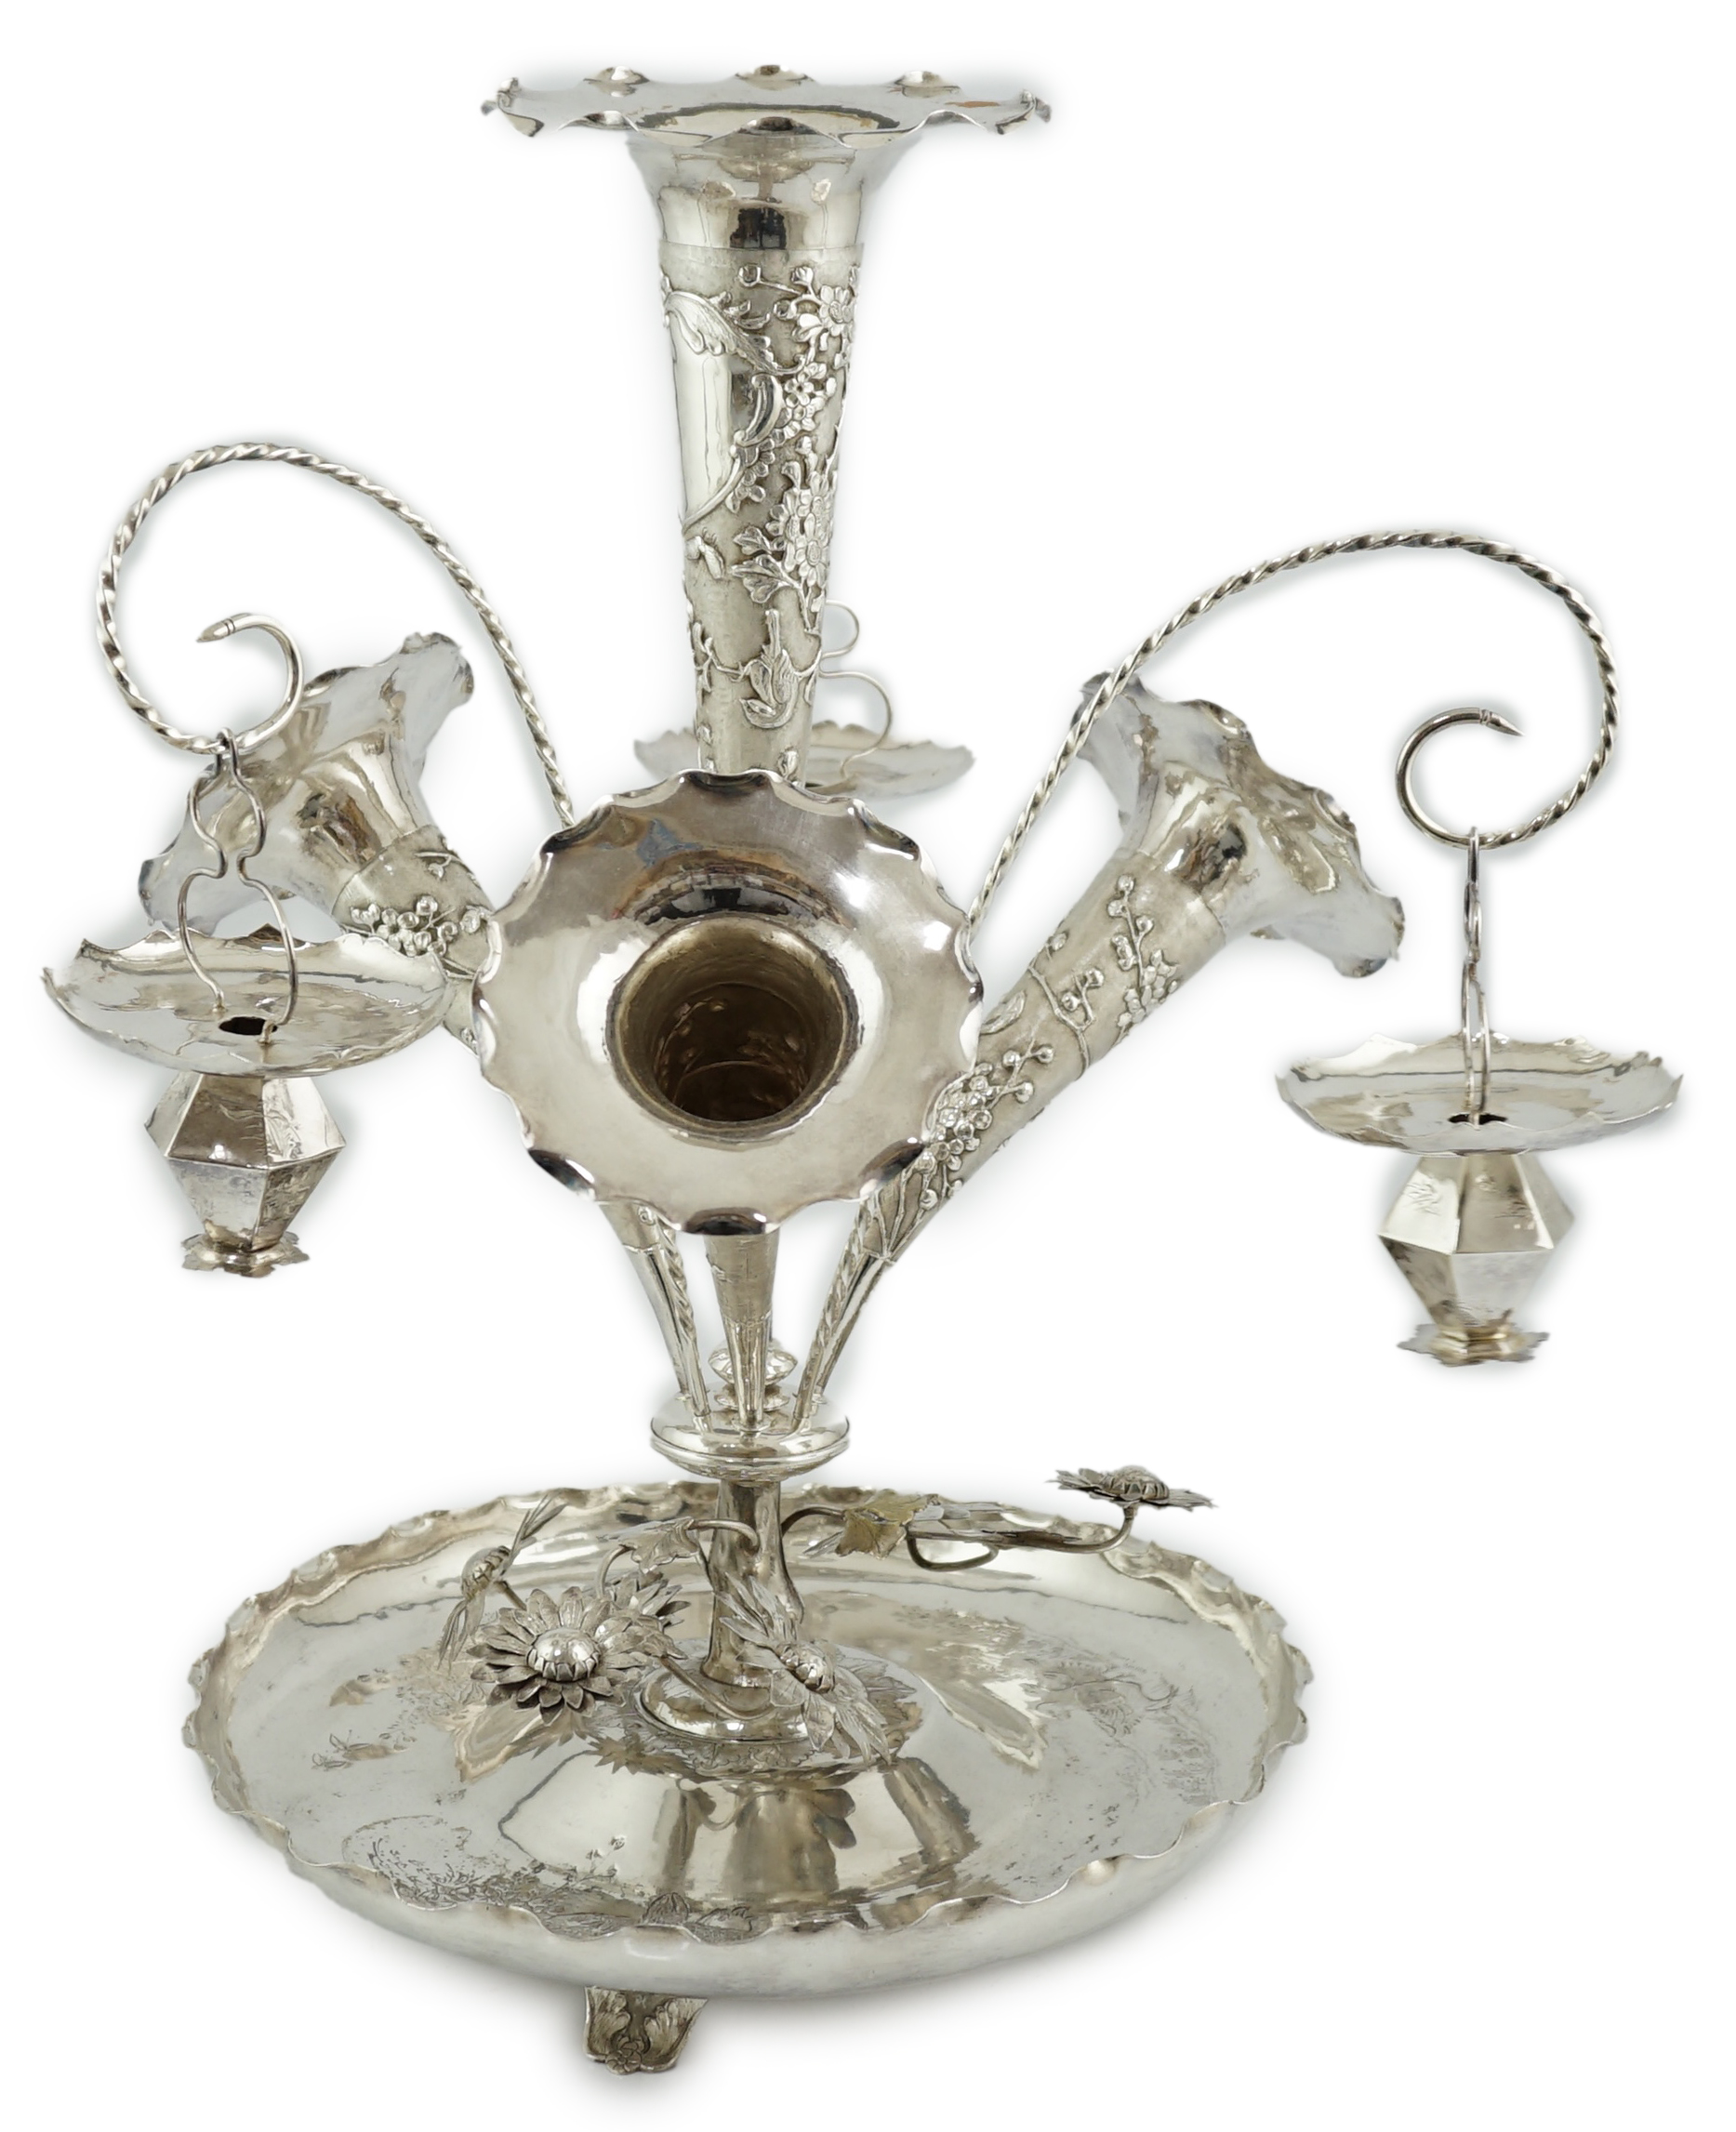 A large early 20th century Chinese silver epergne